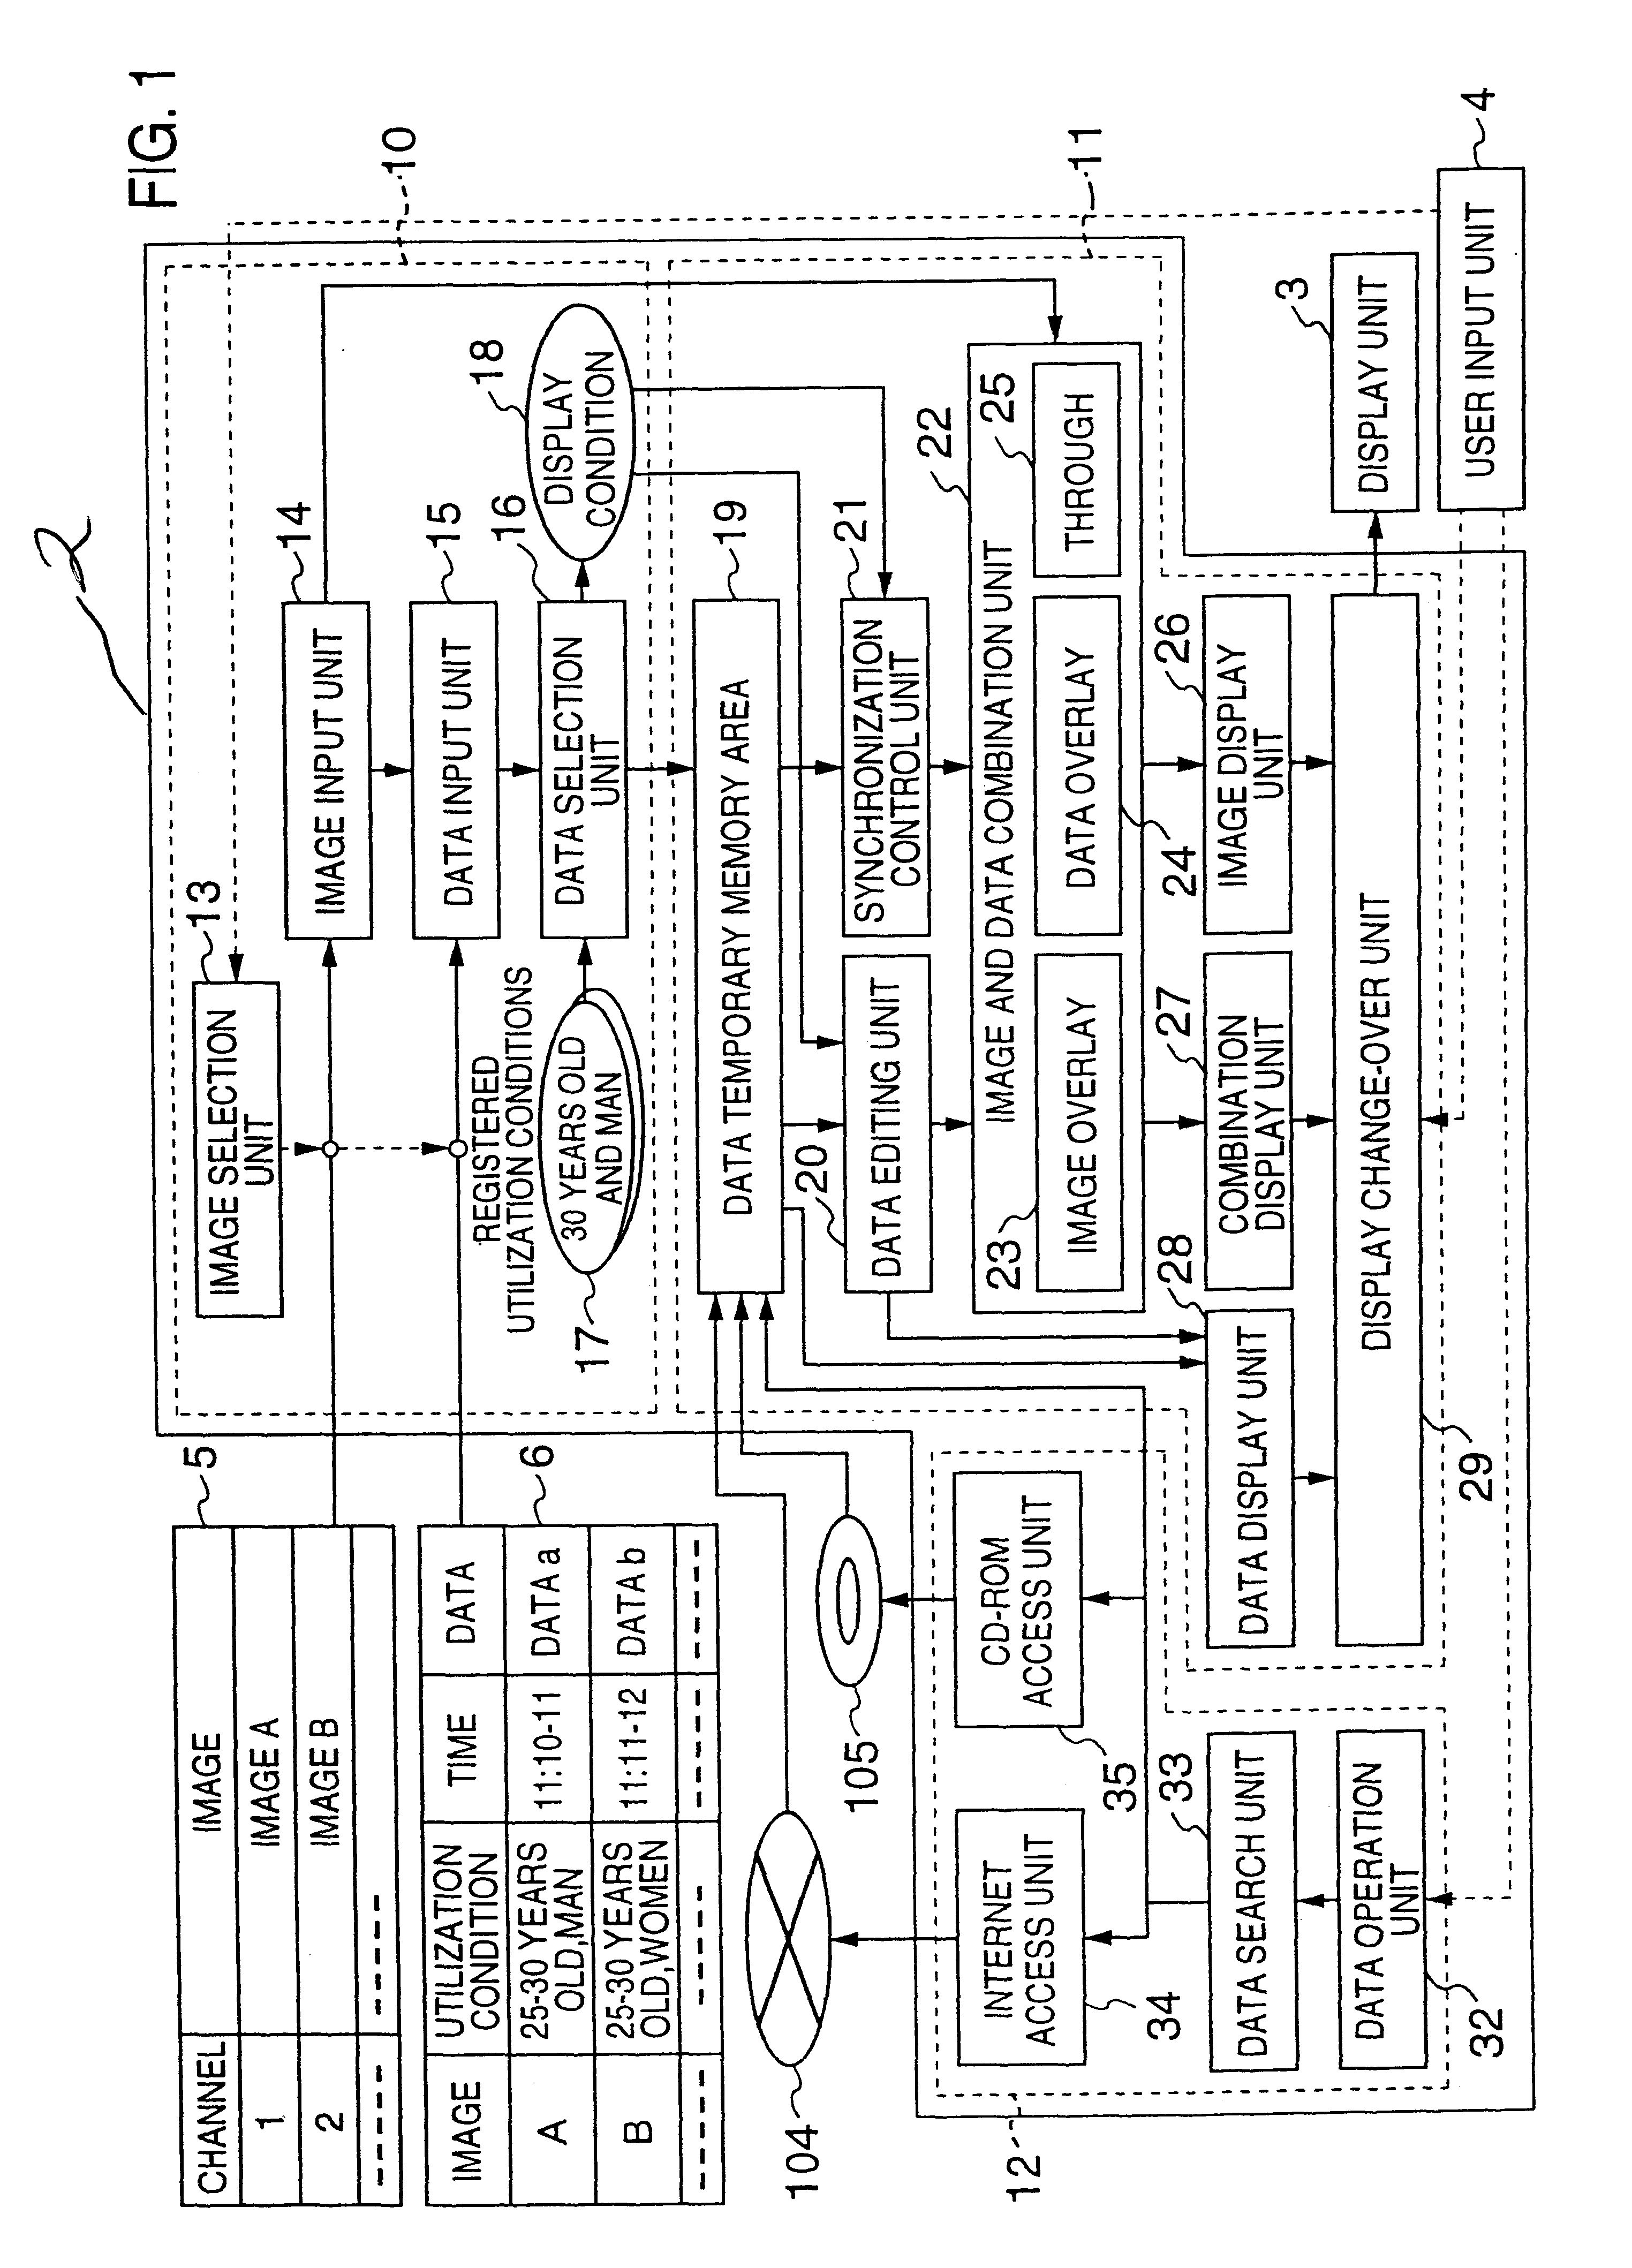 Method and apparatus for displaying an image and data related to the image conditioned on user identifier